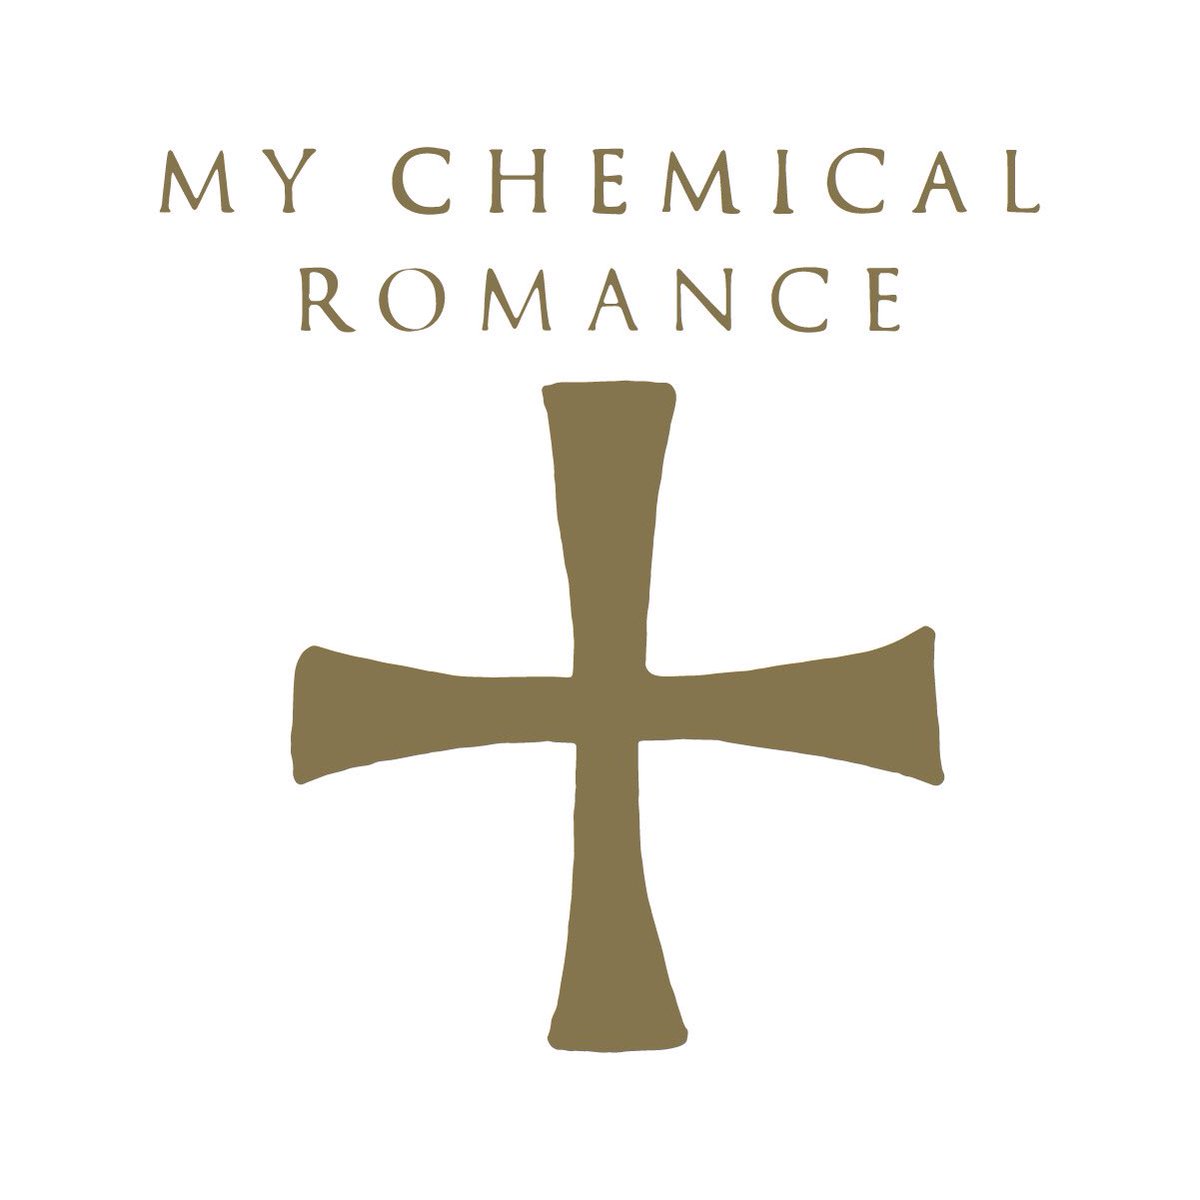 My Chemical Romance is postponing our 2021 touring plans until 2022. Read more: mychemicalromance.com